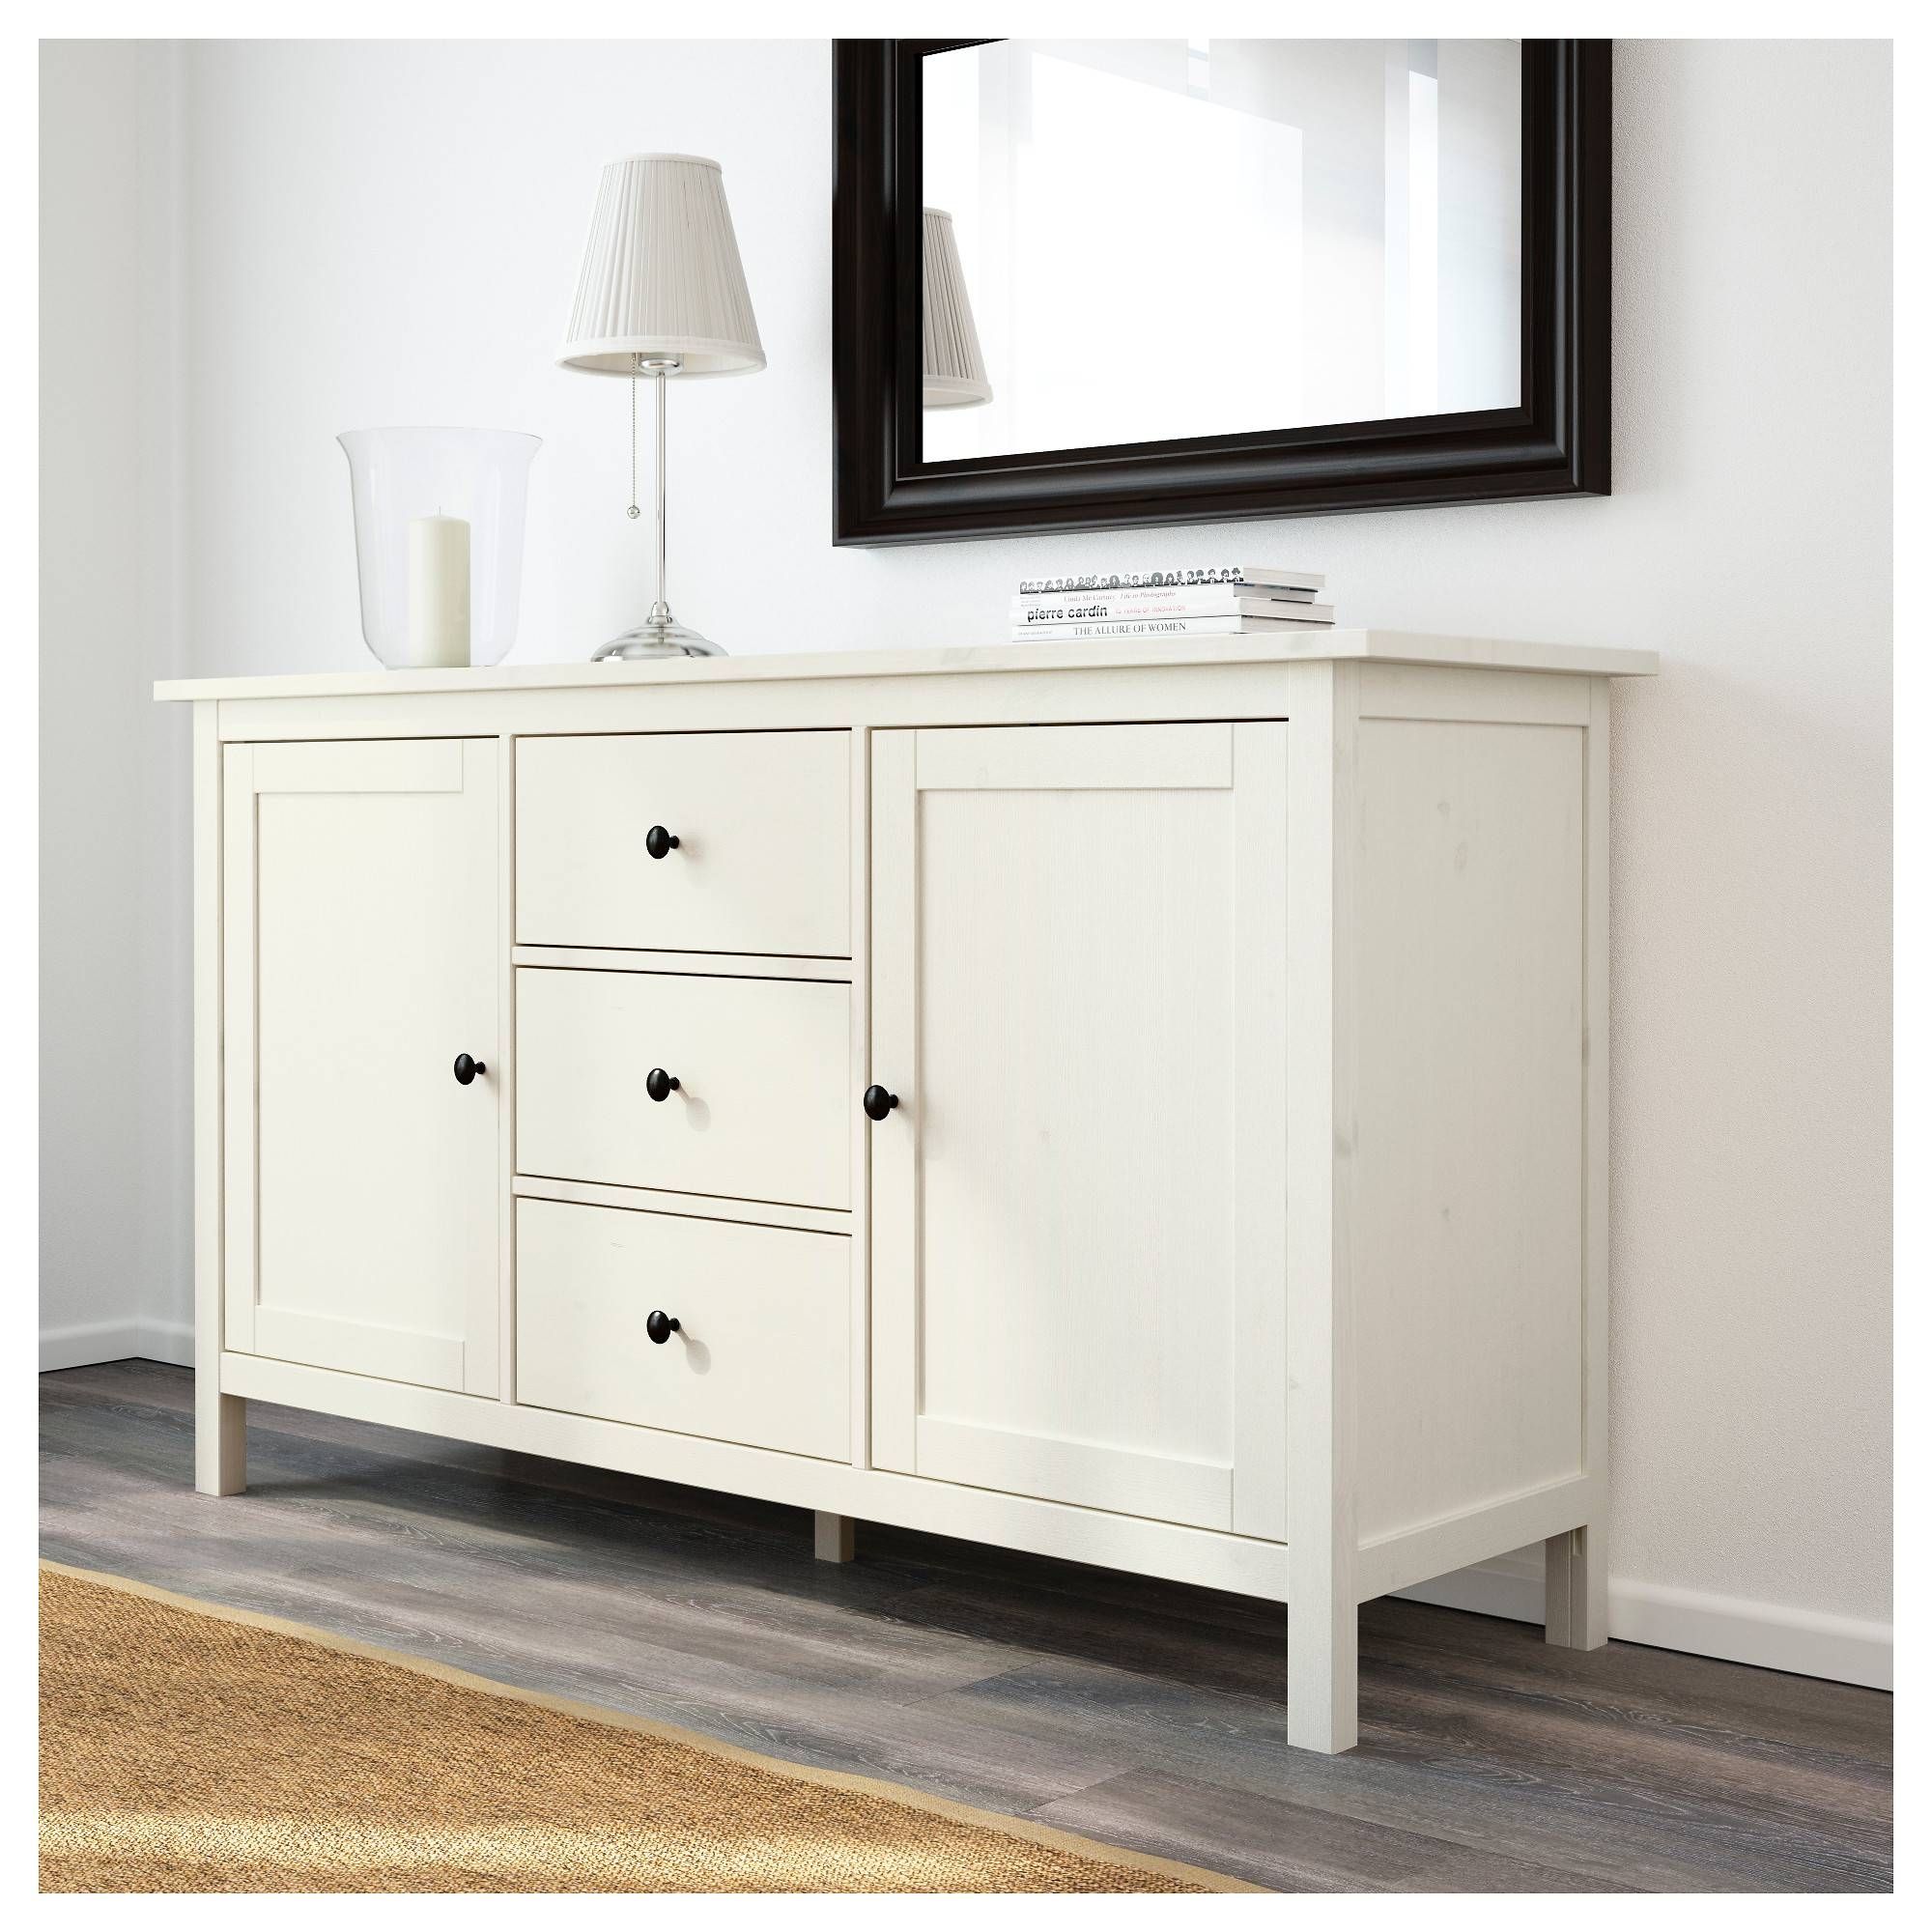 Hemnes Sideboard – White Stain – Ikea For 2018 Storage Sideboards (View 5 of 15)